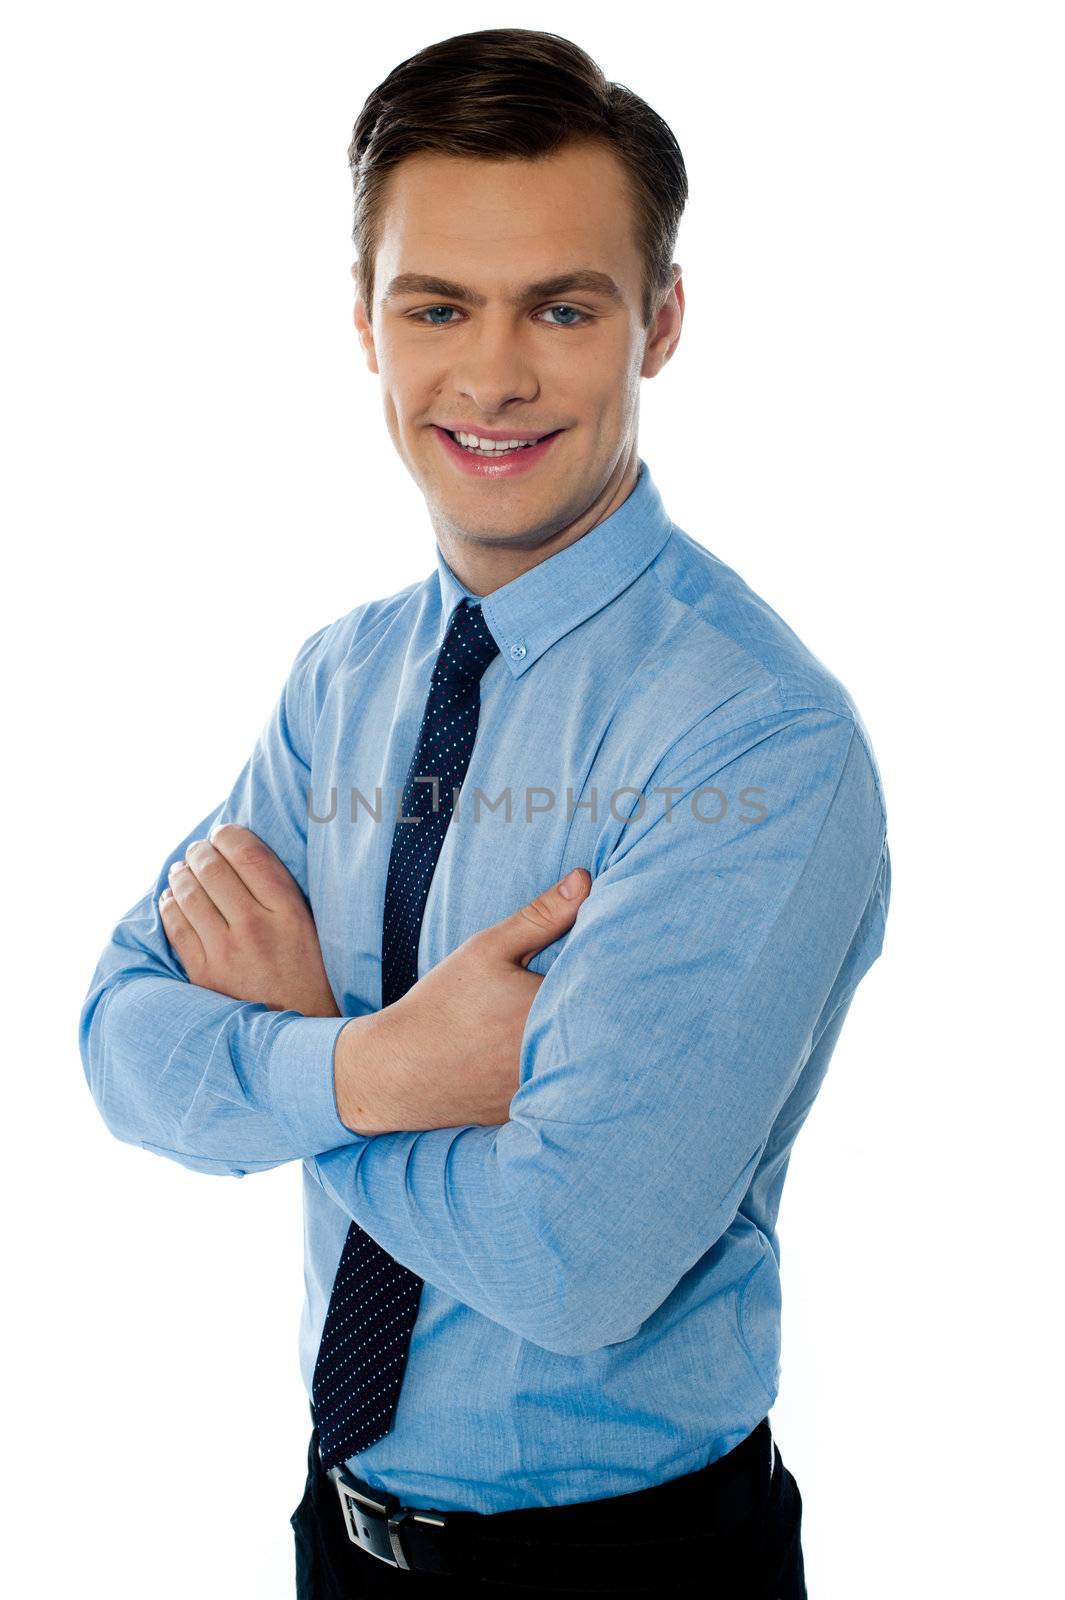 Successful businessman posing with folded arms on white background